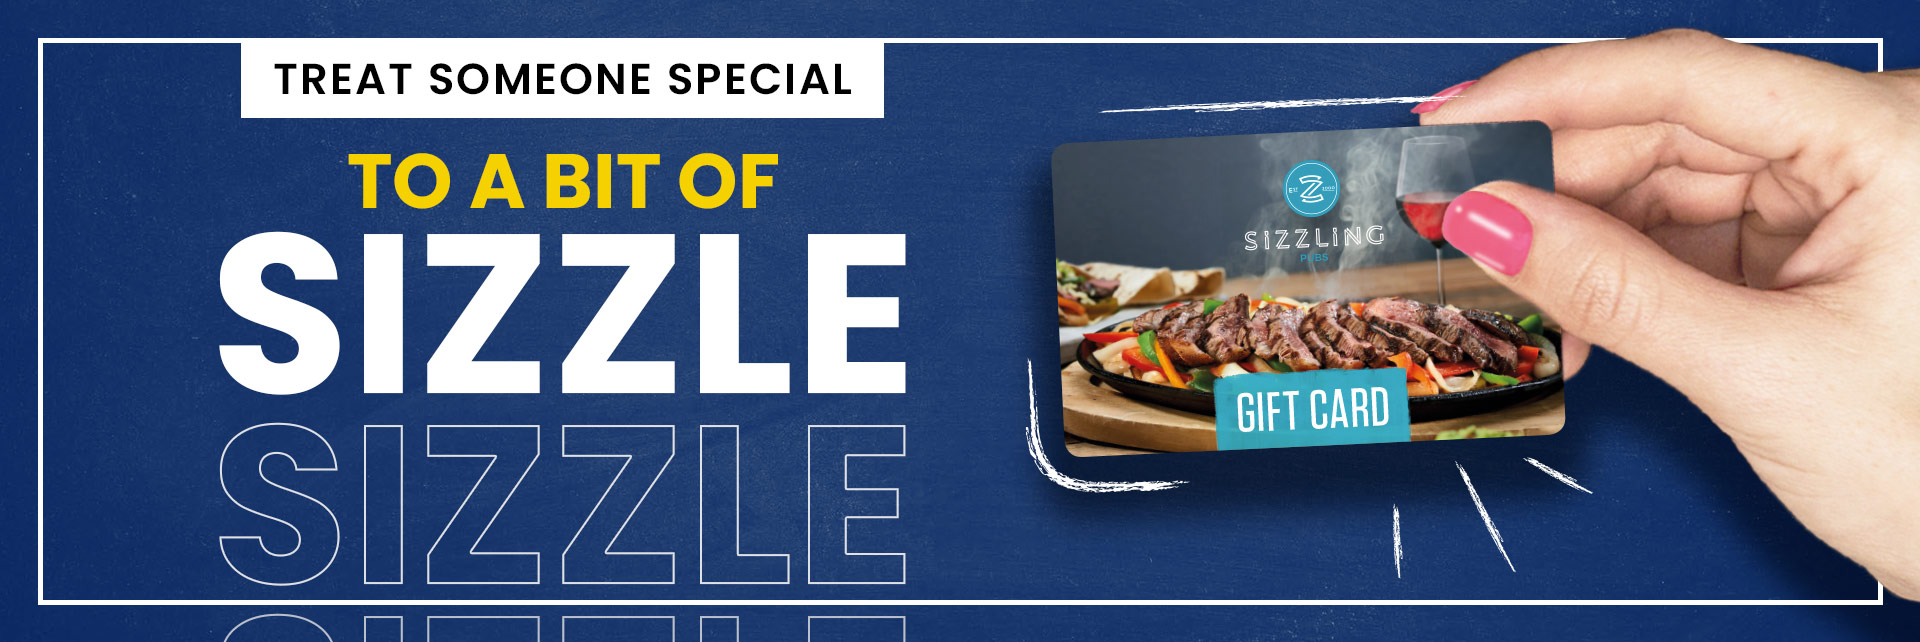 Sizzling Pubs Gift Card at The Hollymere in Sunderland